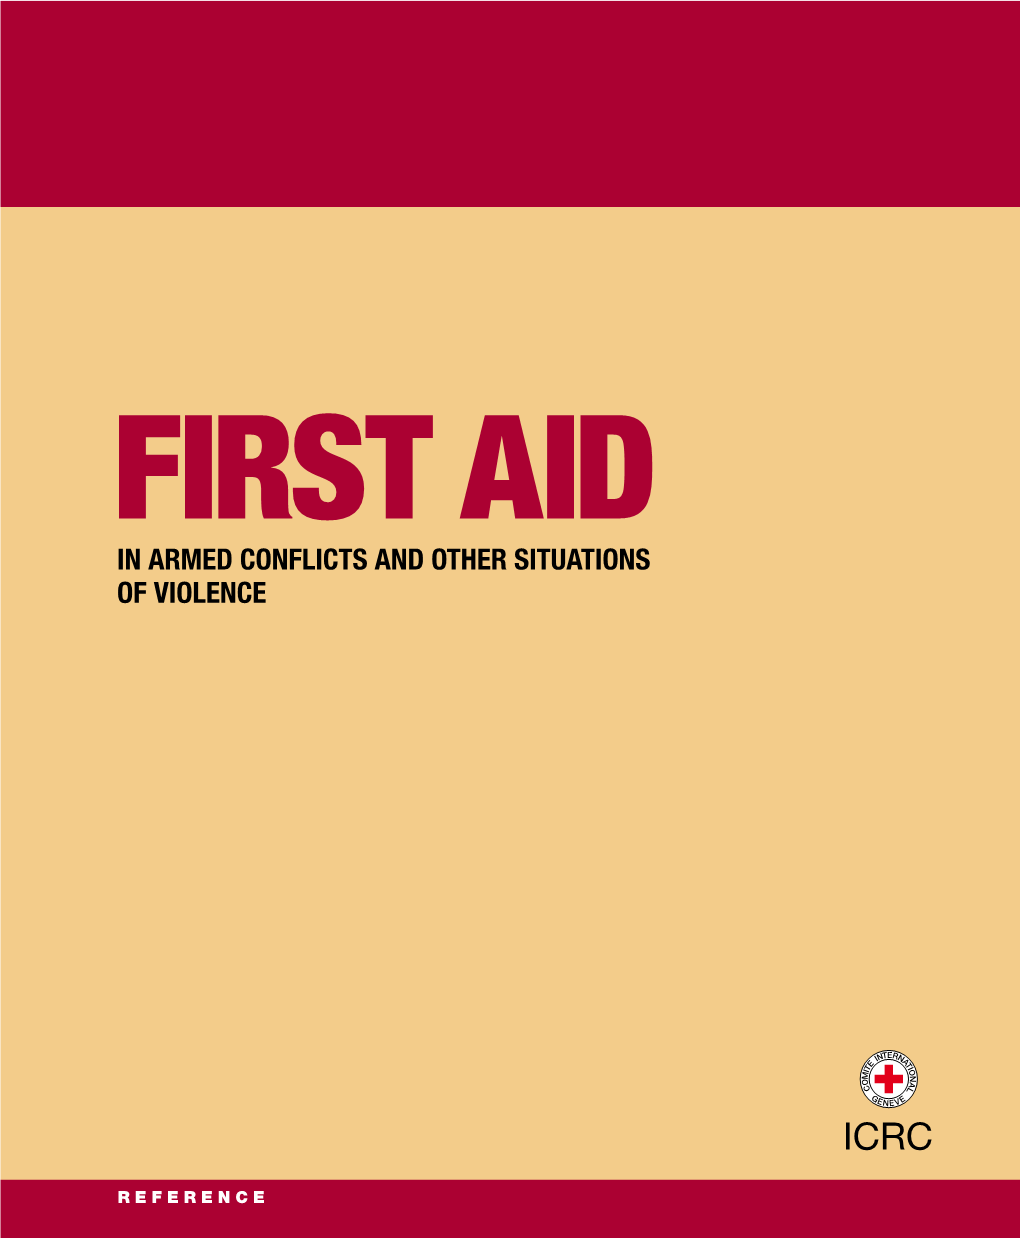 FIRST AID of Violence in Armed Conflicts and Other Situations FIRST AID in Armed Conflicts and Other Situations of Violence